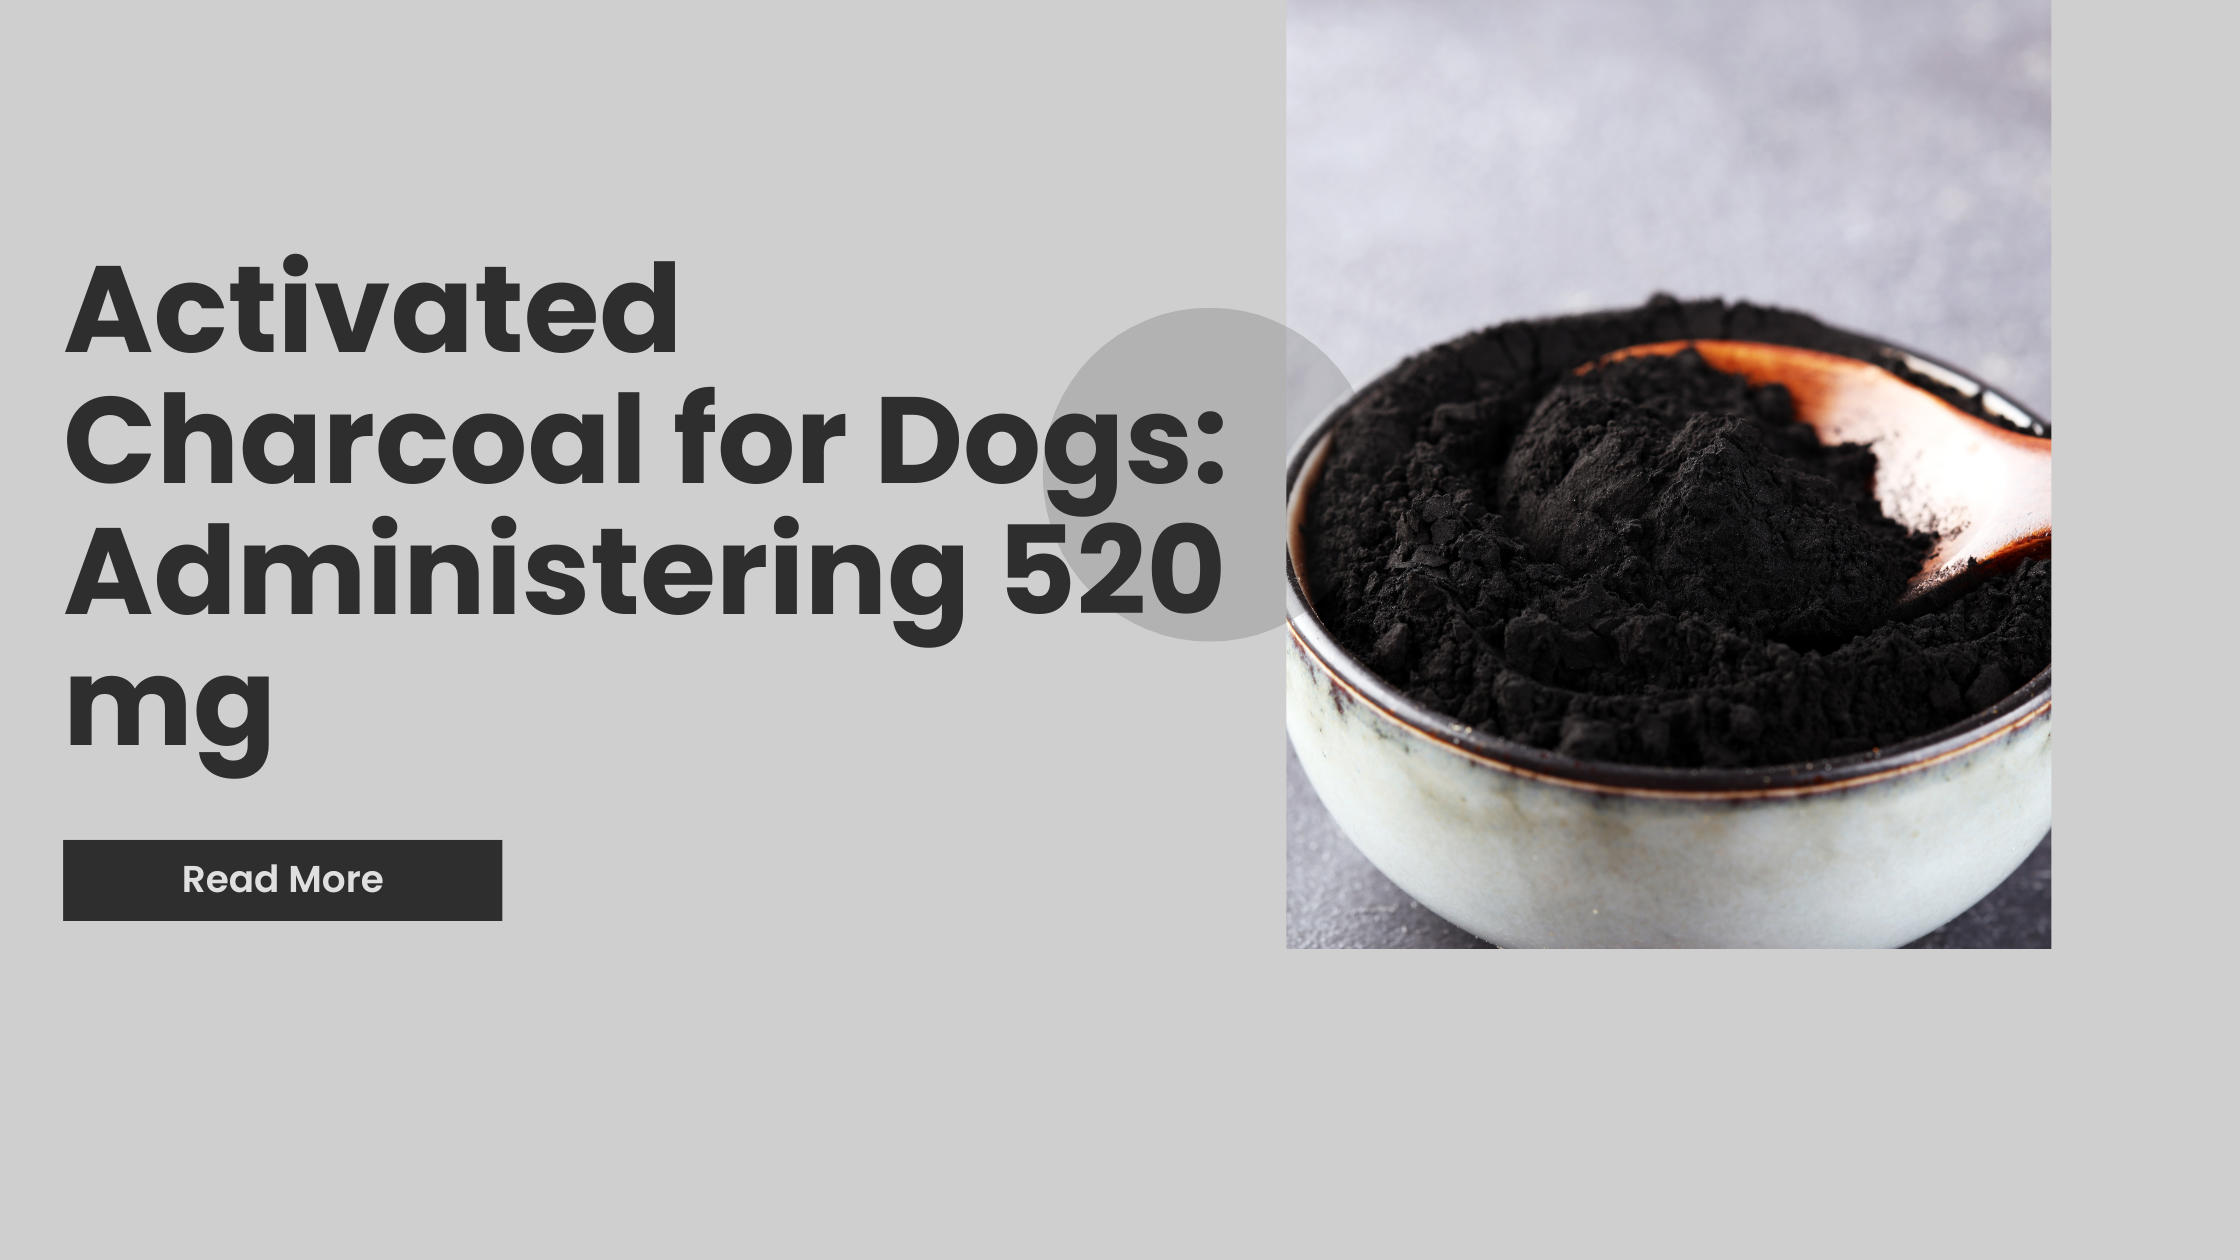 Activated Charcoal for Dogs Administering 520 mg